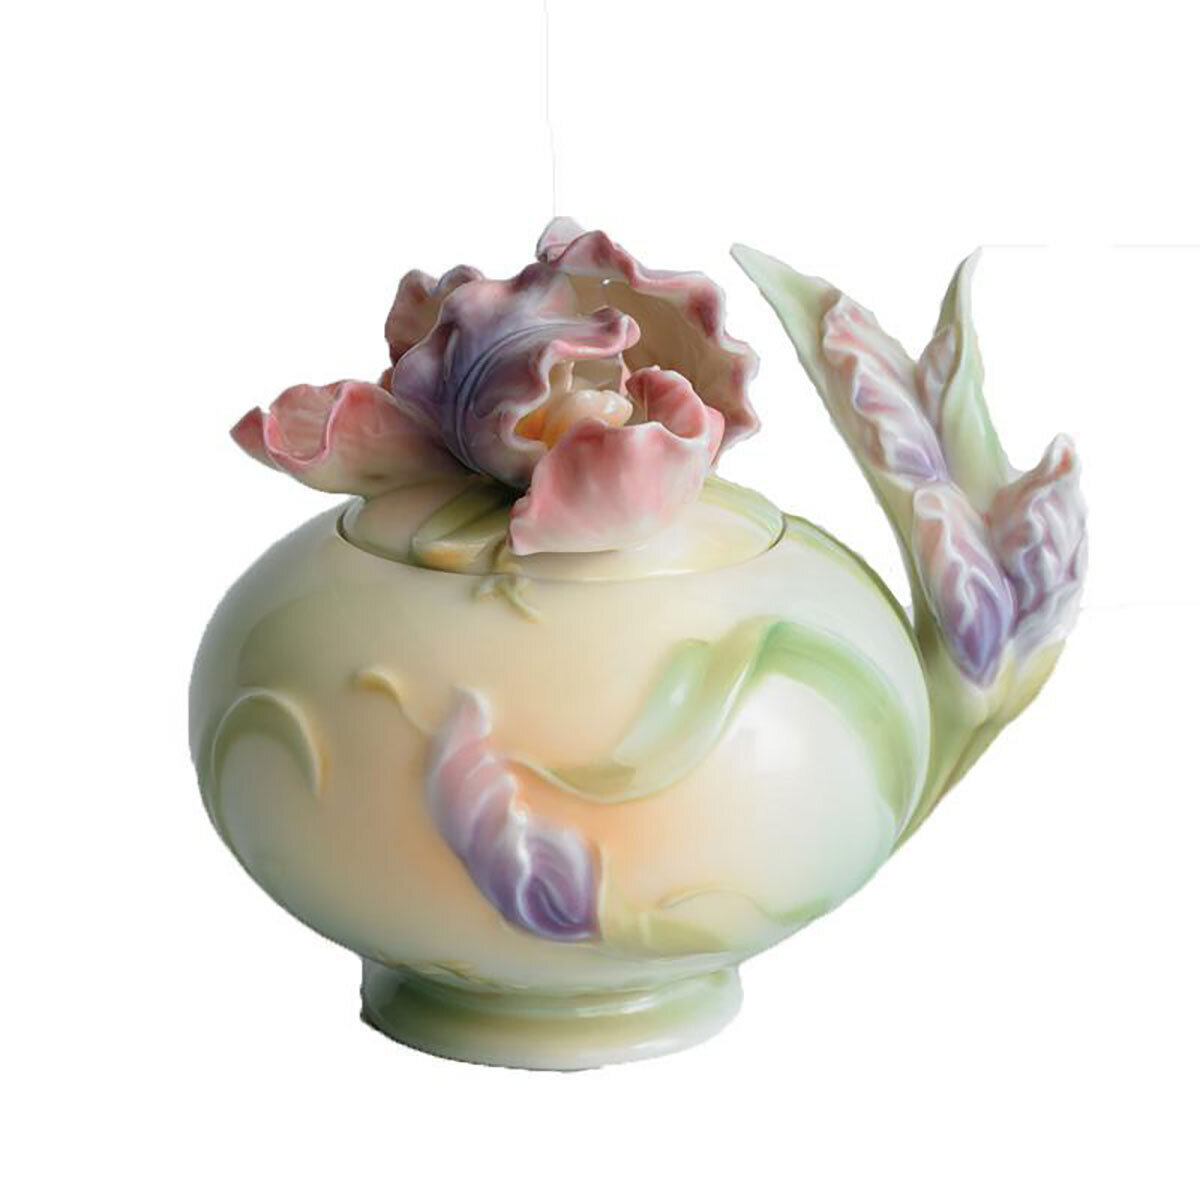 Franz Porcelain Windswept Beauty Iris Sugar Jar With Cover Limited Editon of 2000 FZ00838